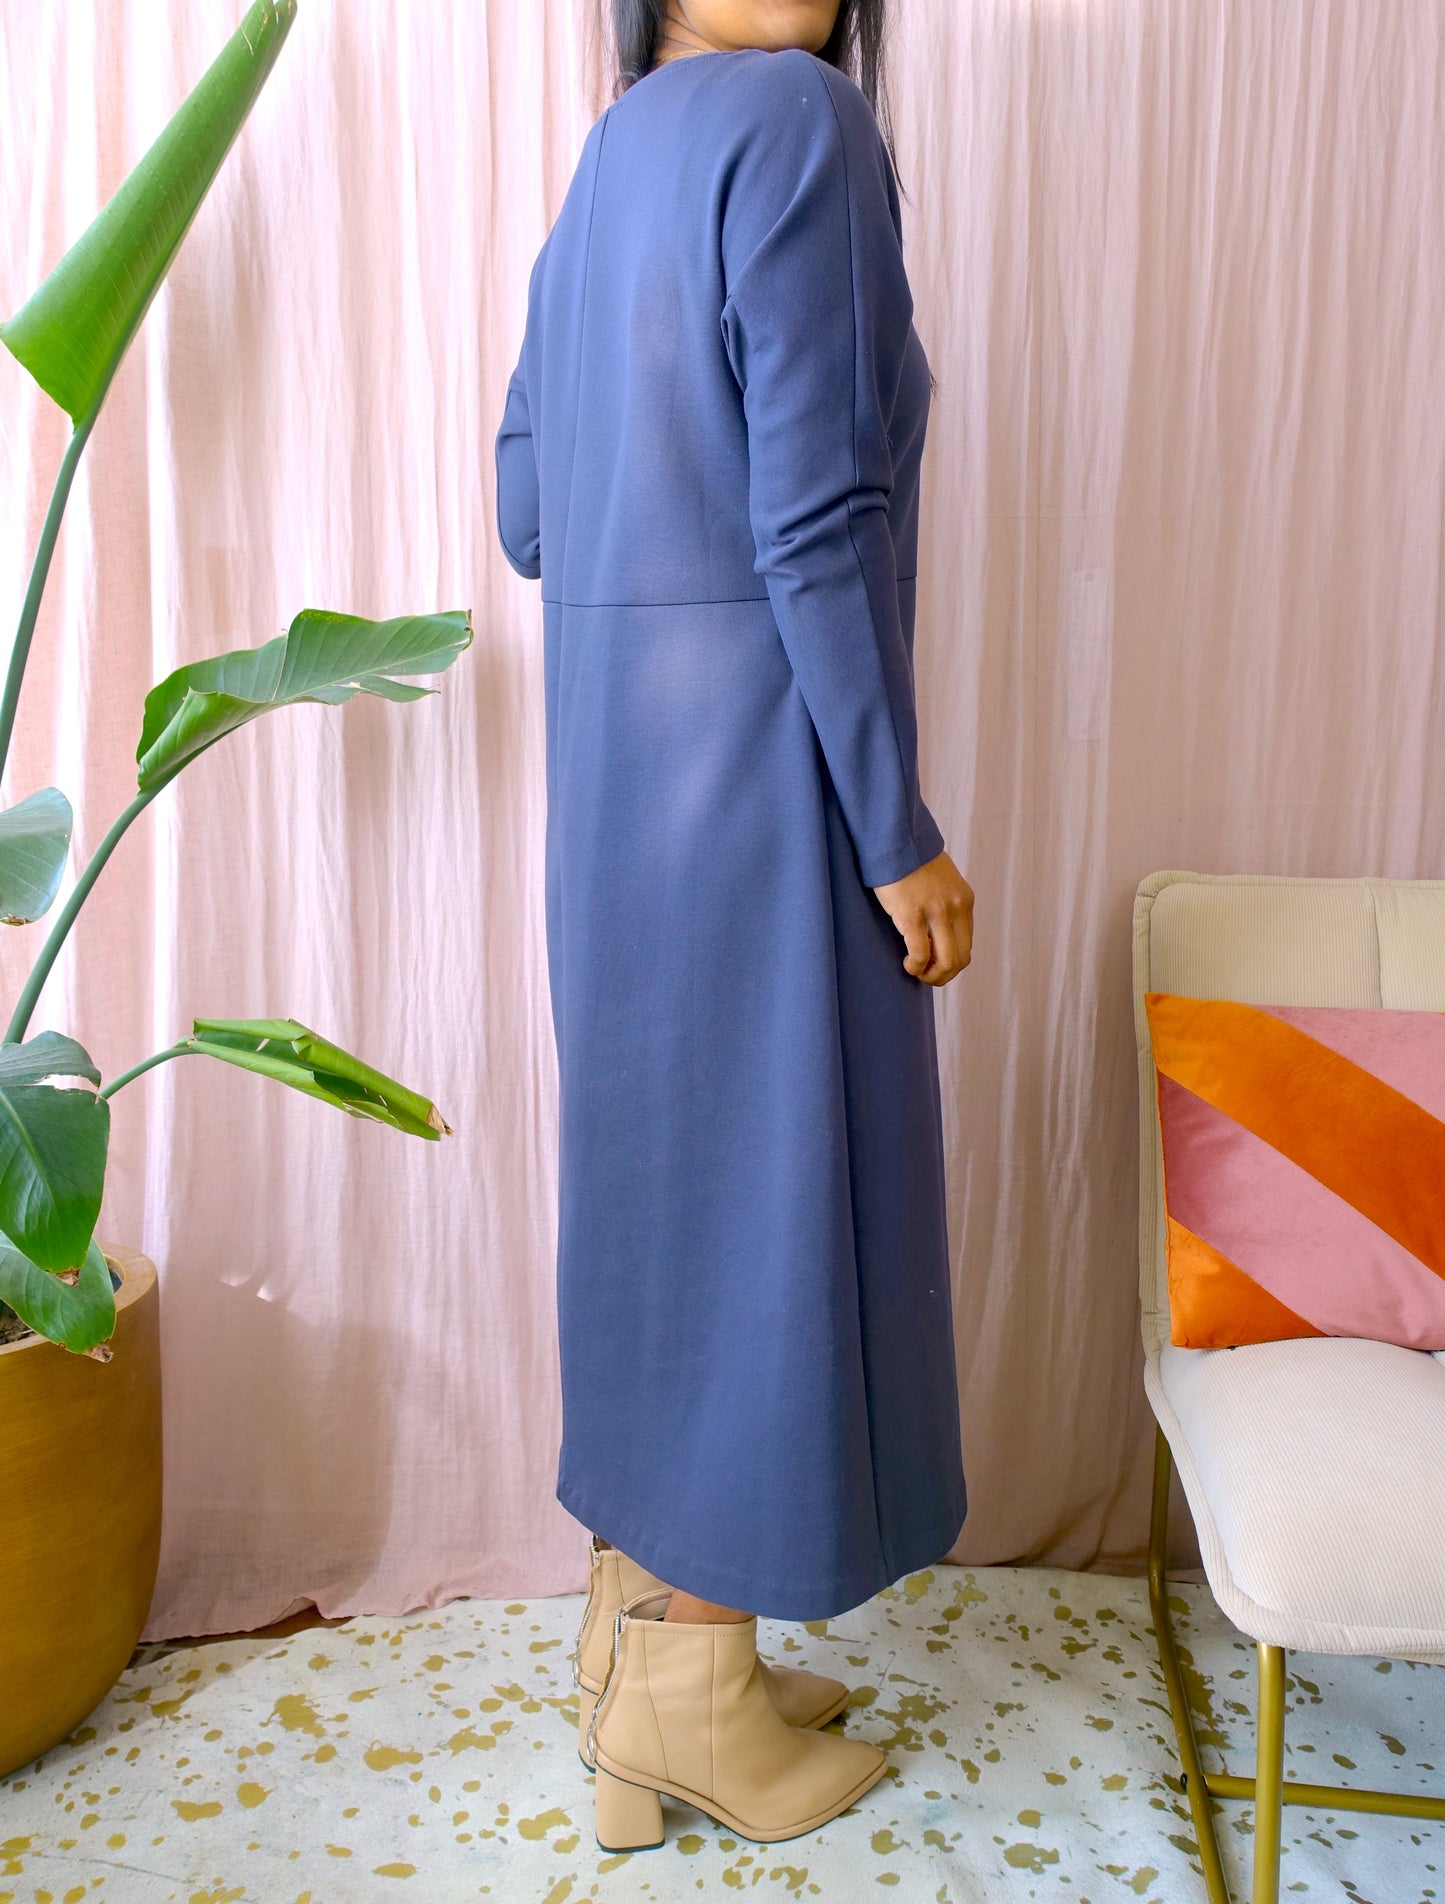 COS soft sweater dress old blue